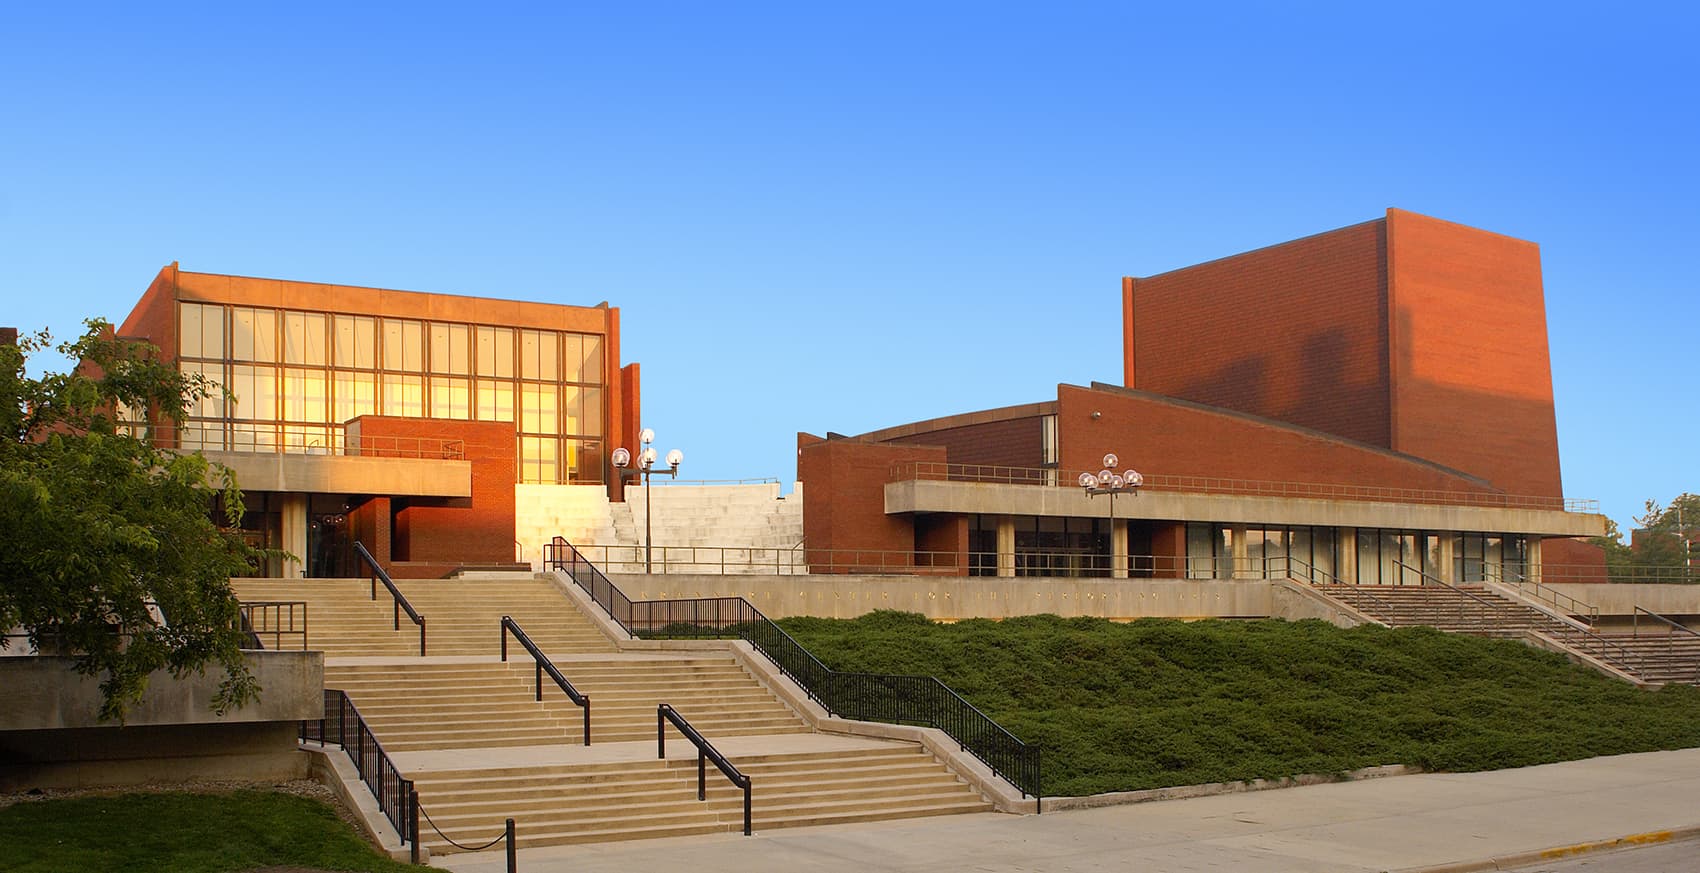 The University of Illinois’ Krannert Center for the Performing Arts in Urbana first opened in April 1969, and was designed by architect Max Abramovitz, who's known for his work on the David Geffen Hall at Lincoln Center in New York, among other famous buildings. (Courtesy of Krannert Center for the Performing Arts)